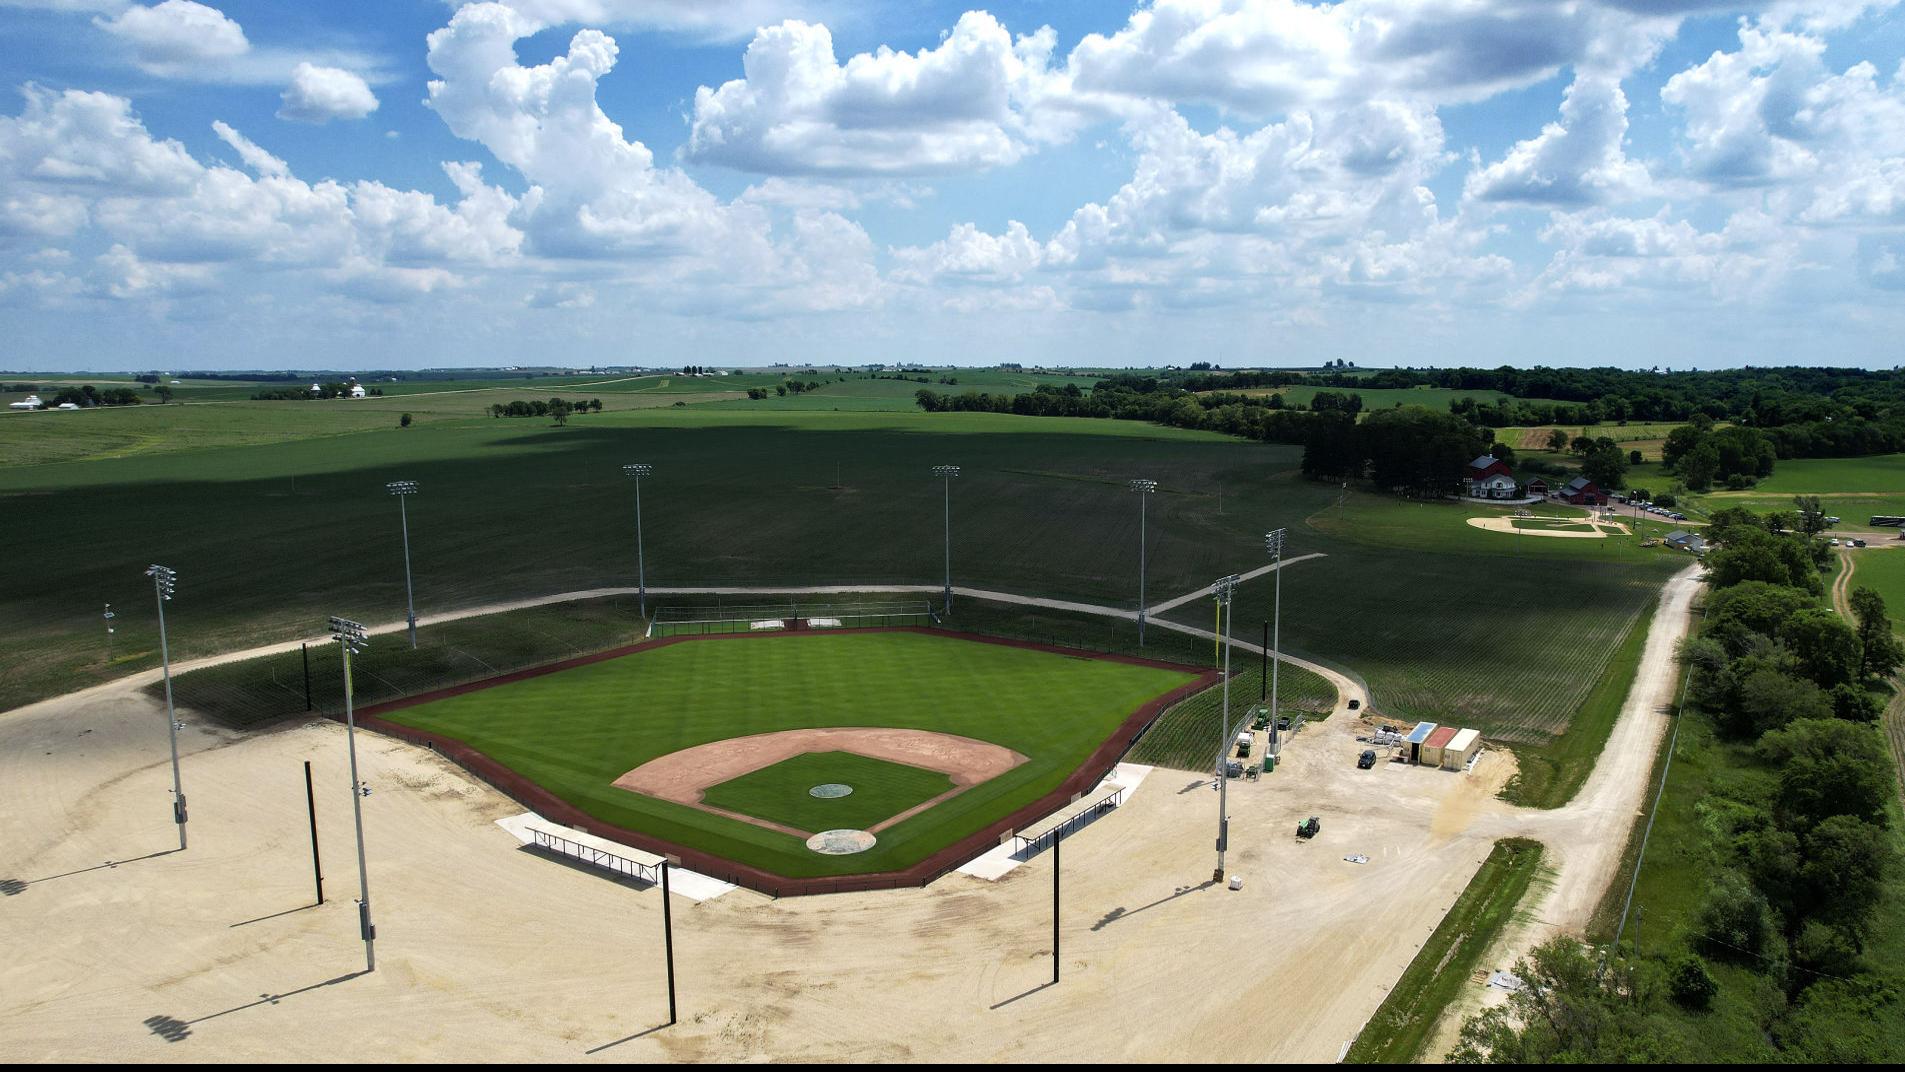 2 months out, plans 'full steam ahead' for Field of Dreams MLB game, Tri-state News